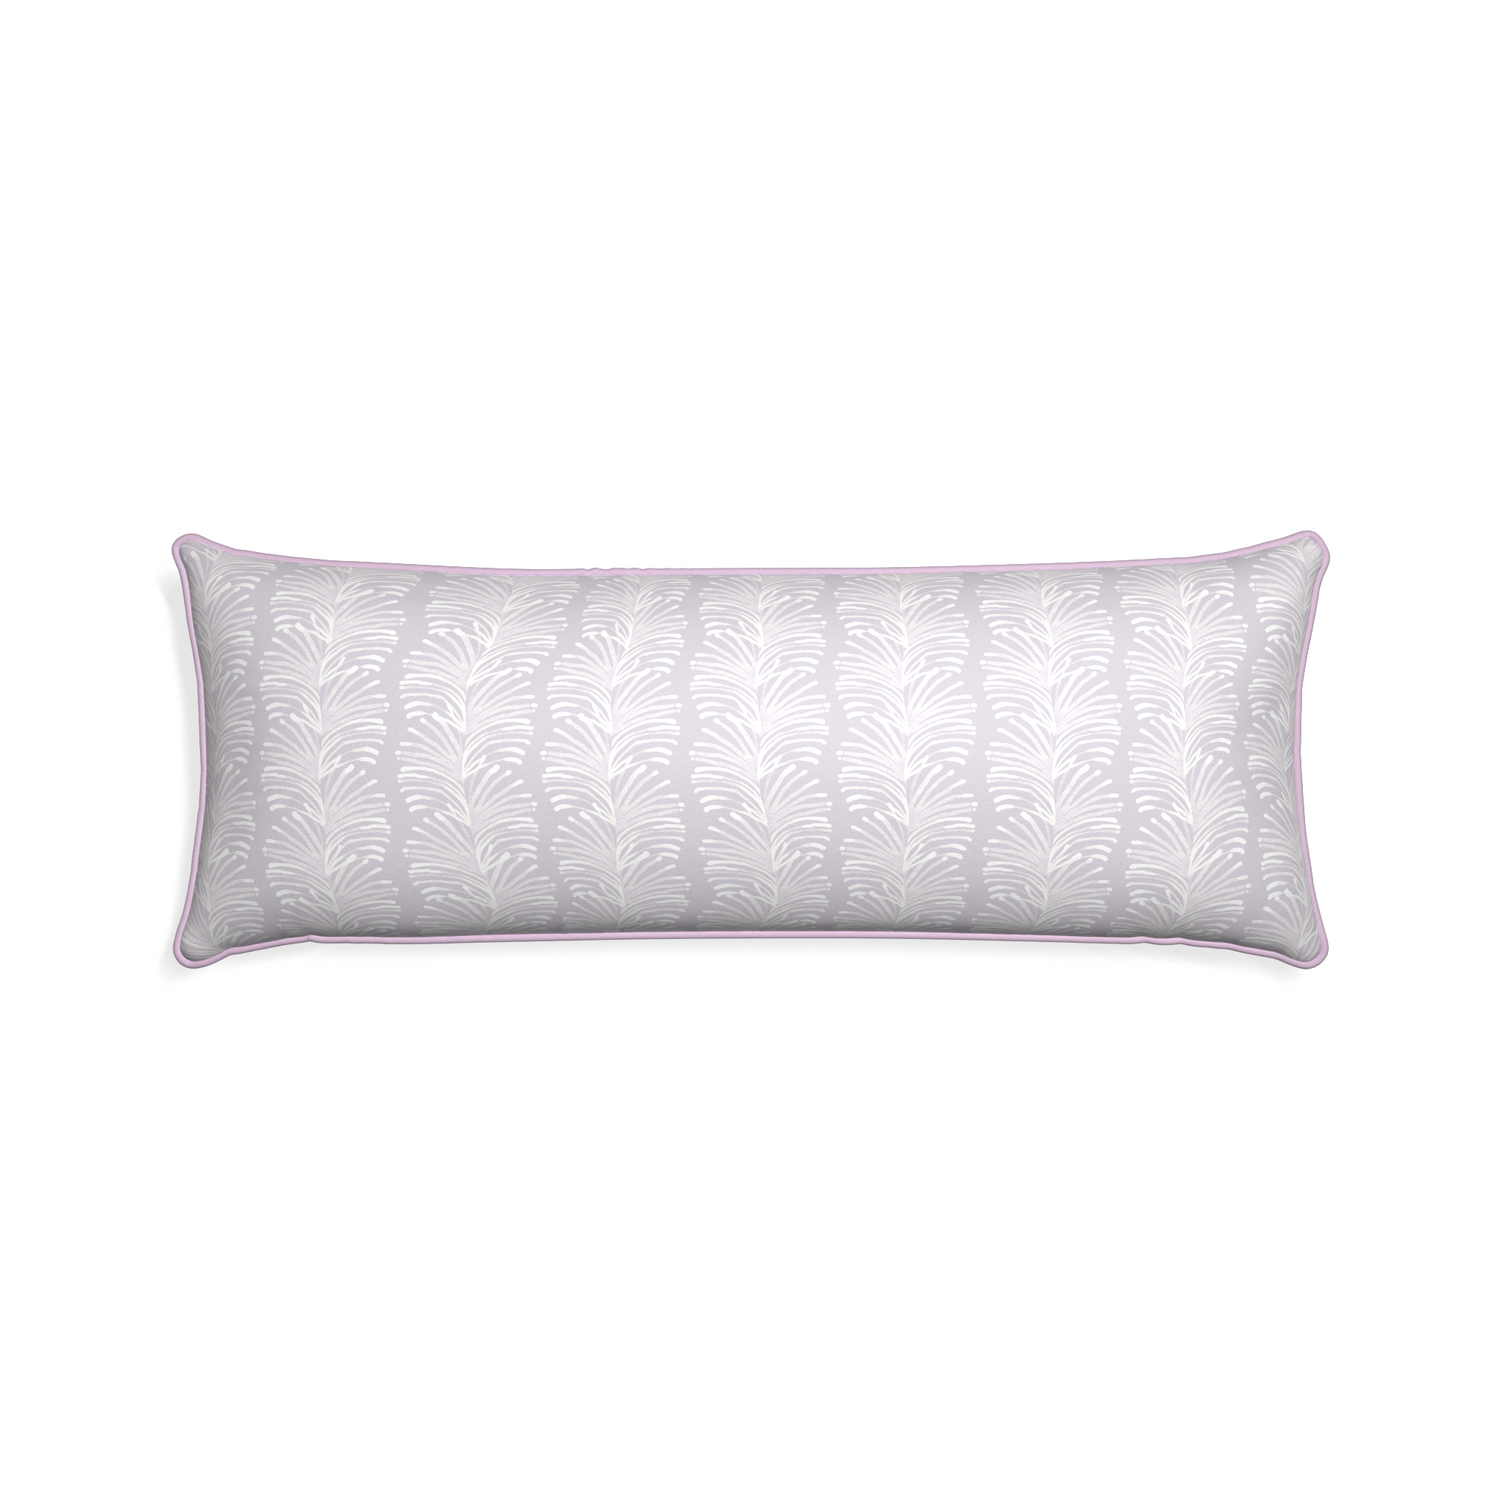 Xl-lumbar emma lavender custom pillow with l piping on white background